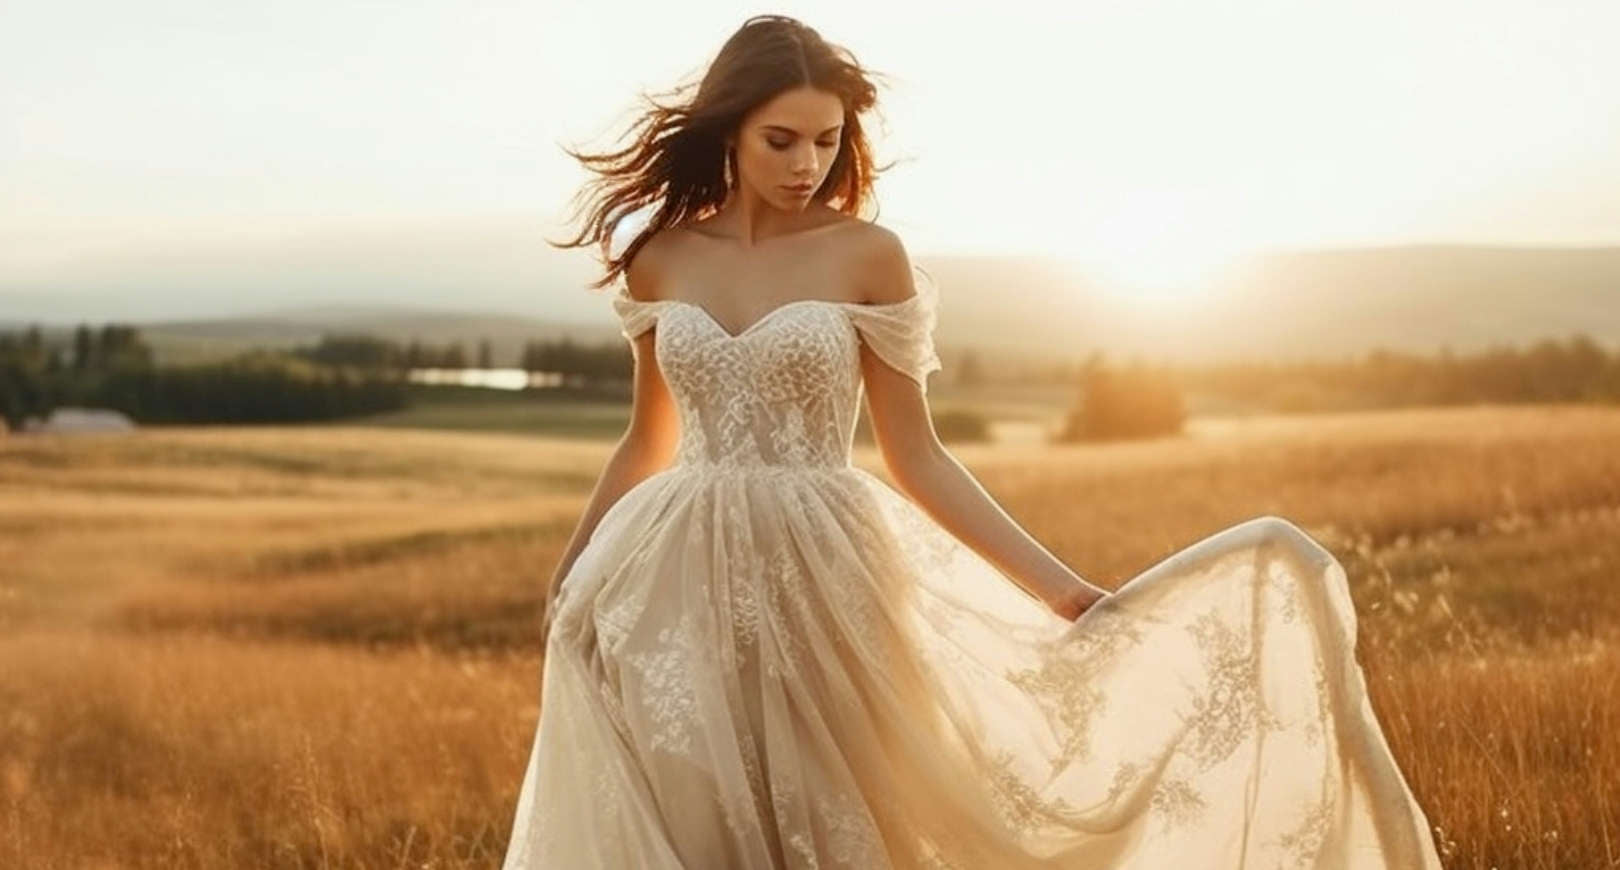 how much to dry clean a wedding dress